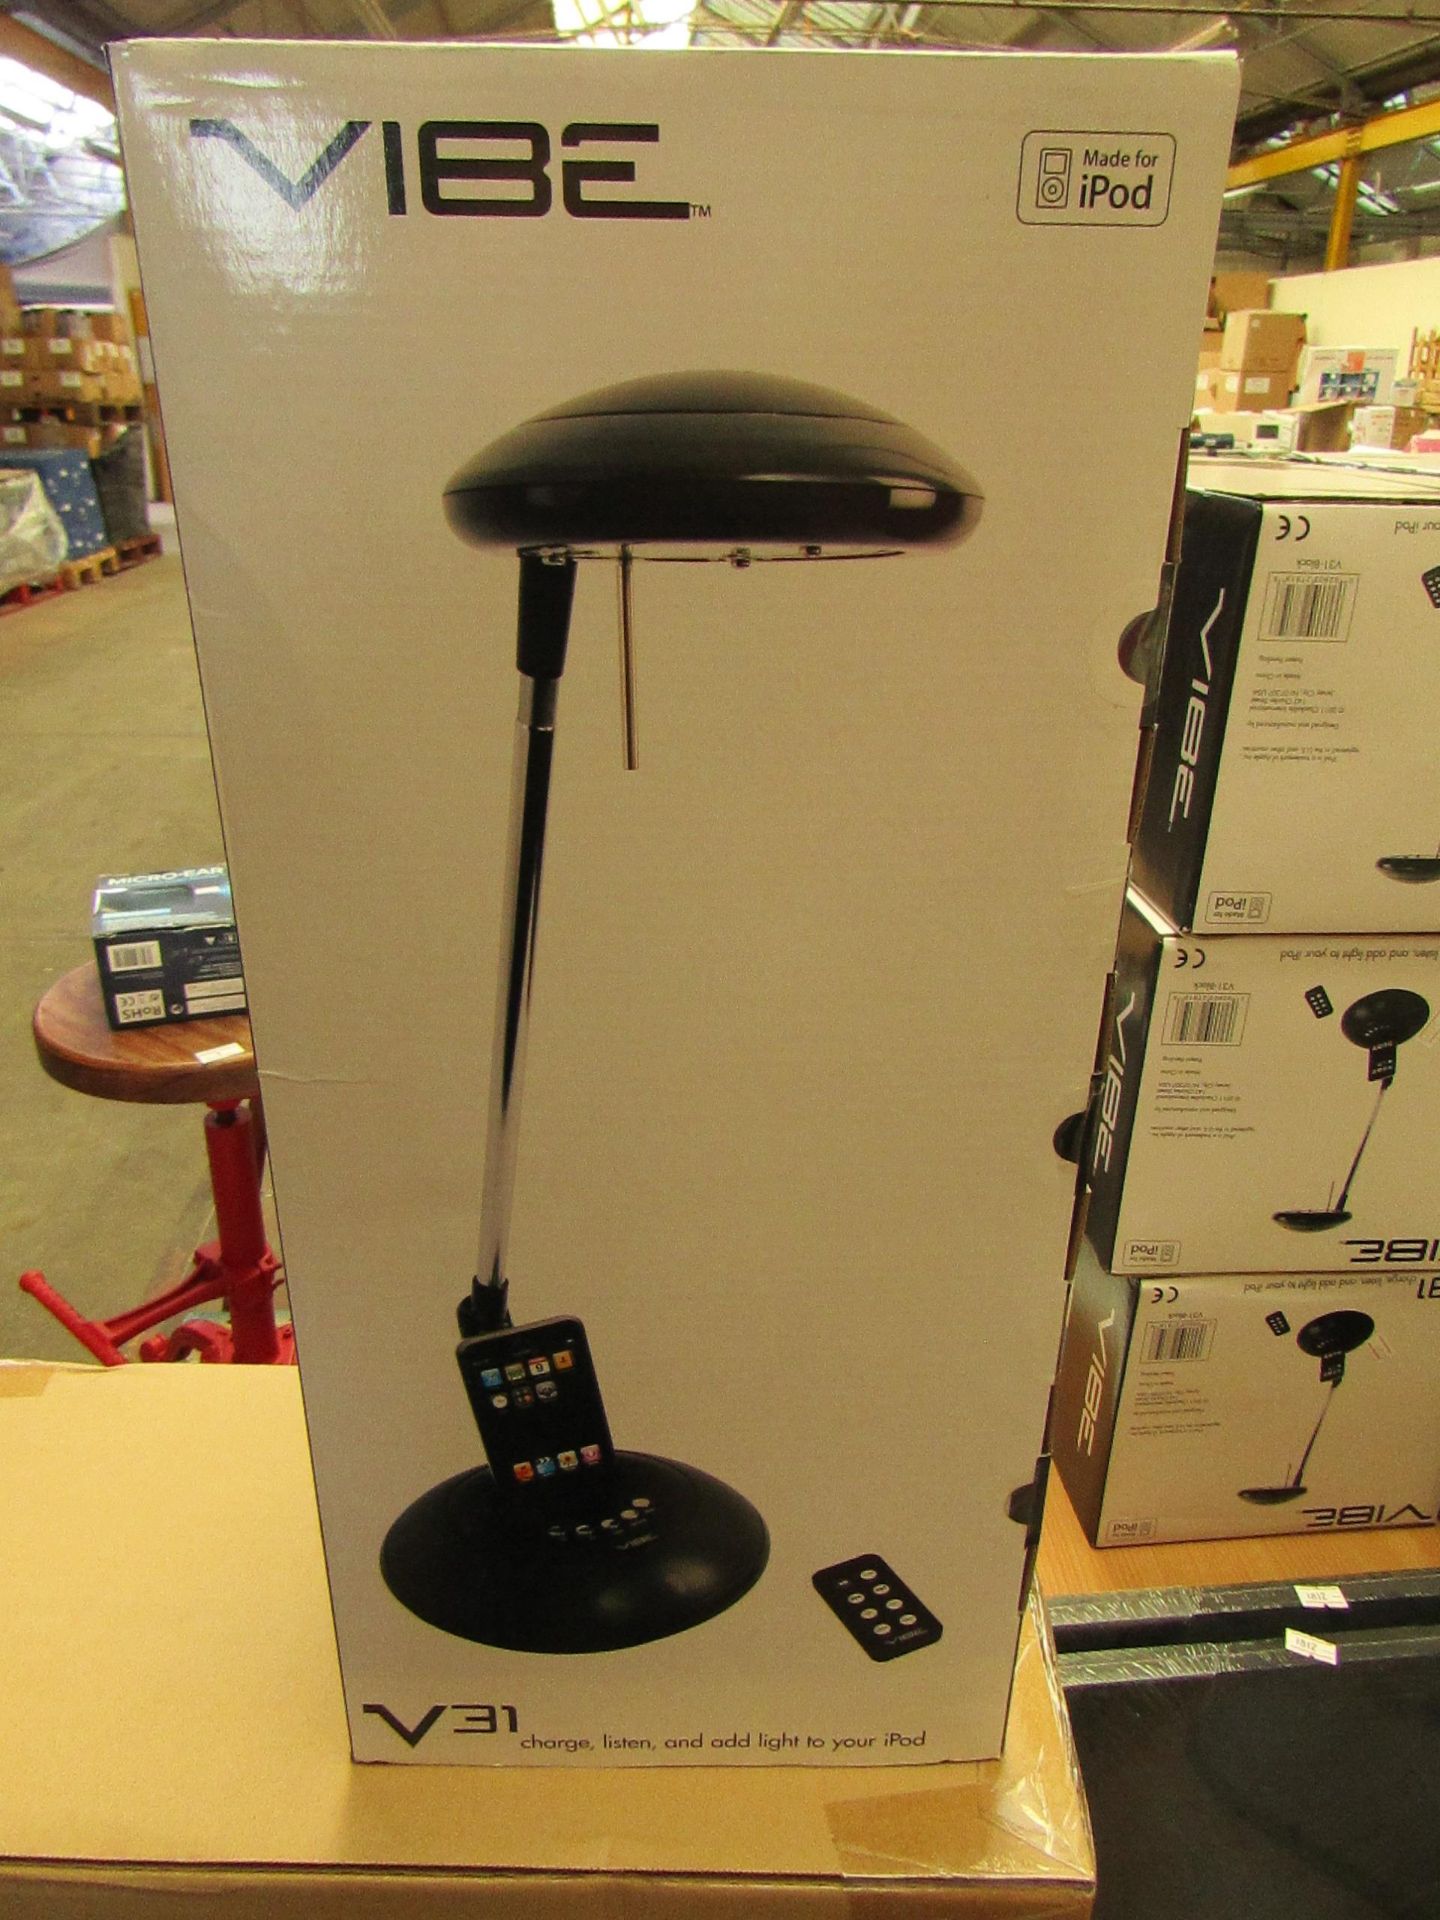 Vibe V31 Ipod Docking station With light. Can Be Used With AUX Lead to connect to your Phone.